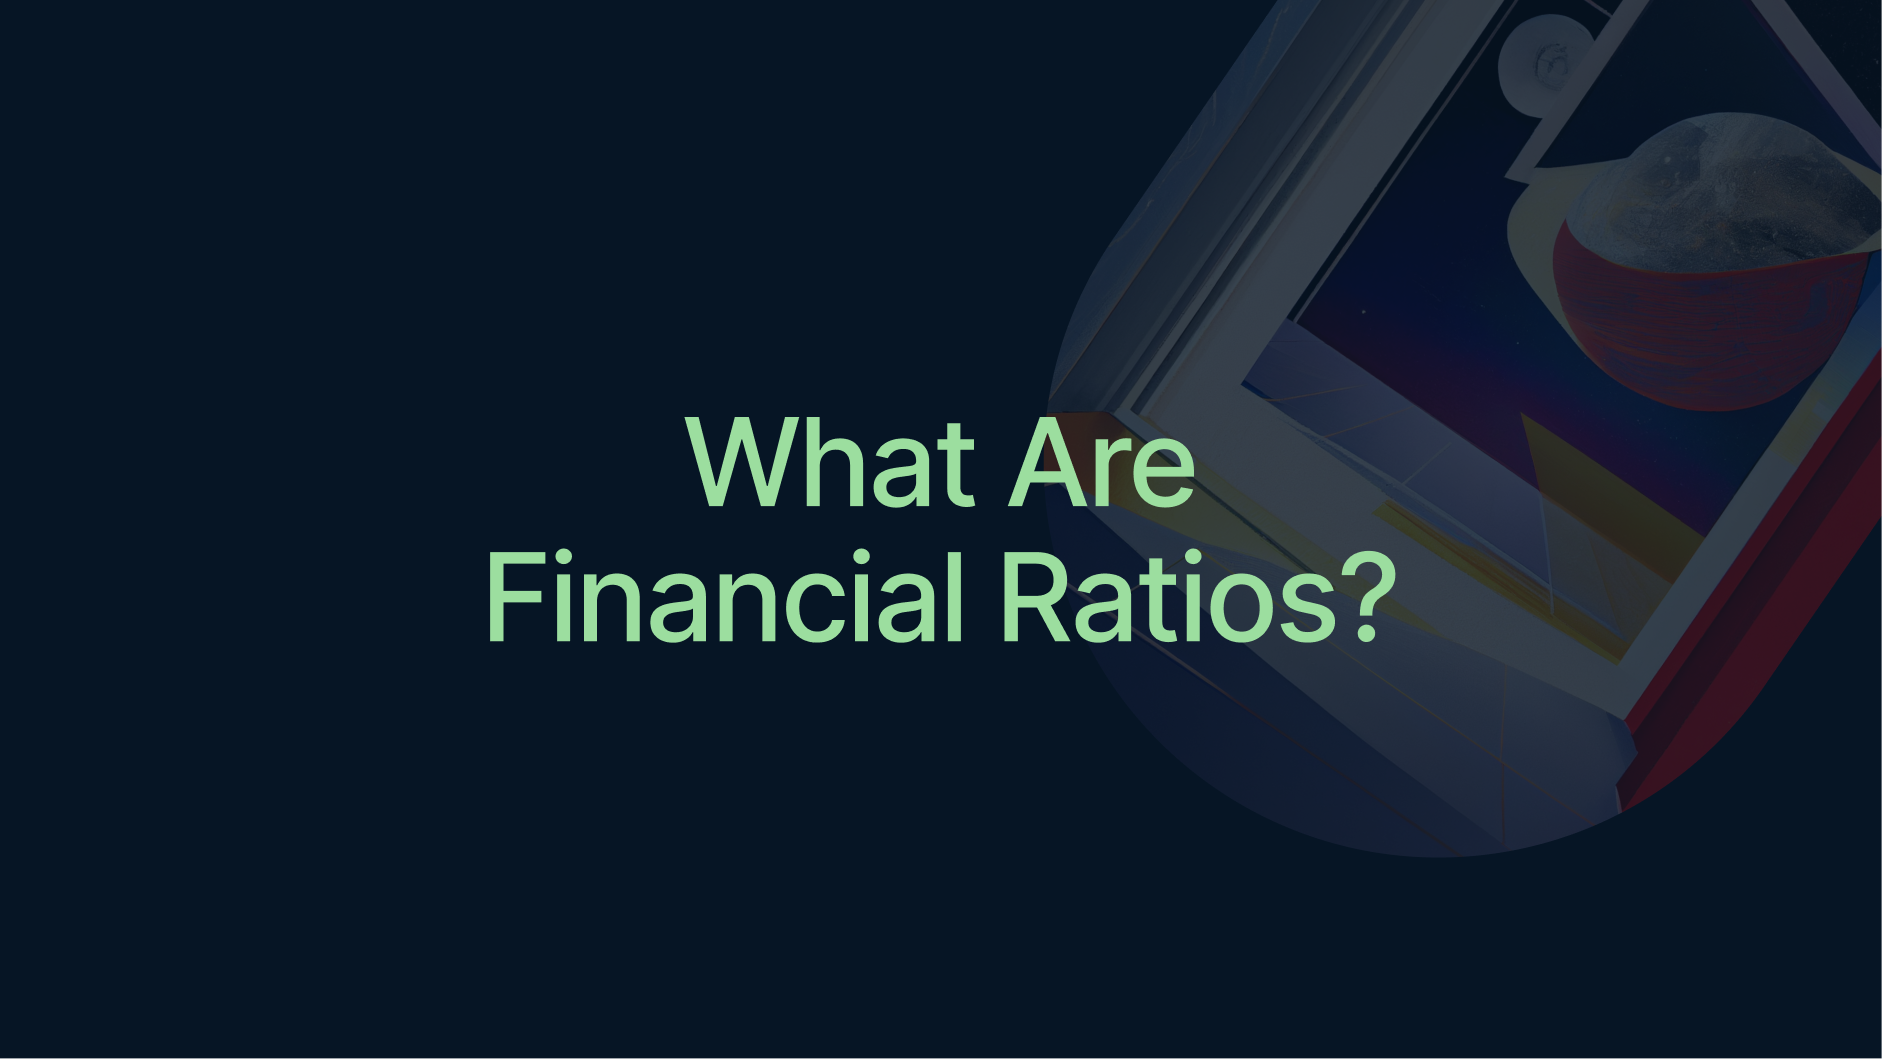 Financial Ratios, ROIC, Operating Leverage, Current Ratio etc - What are they